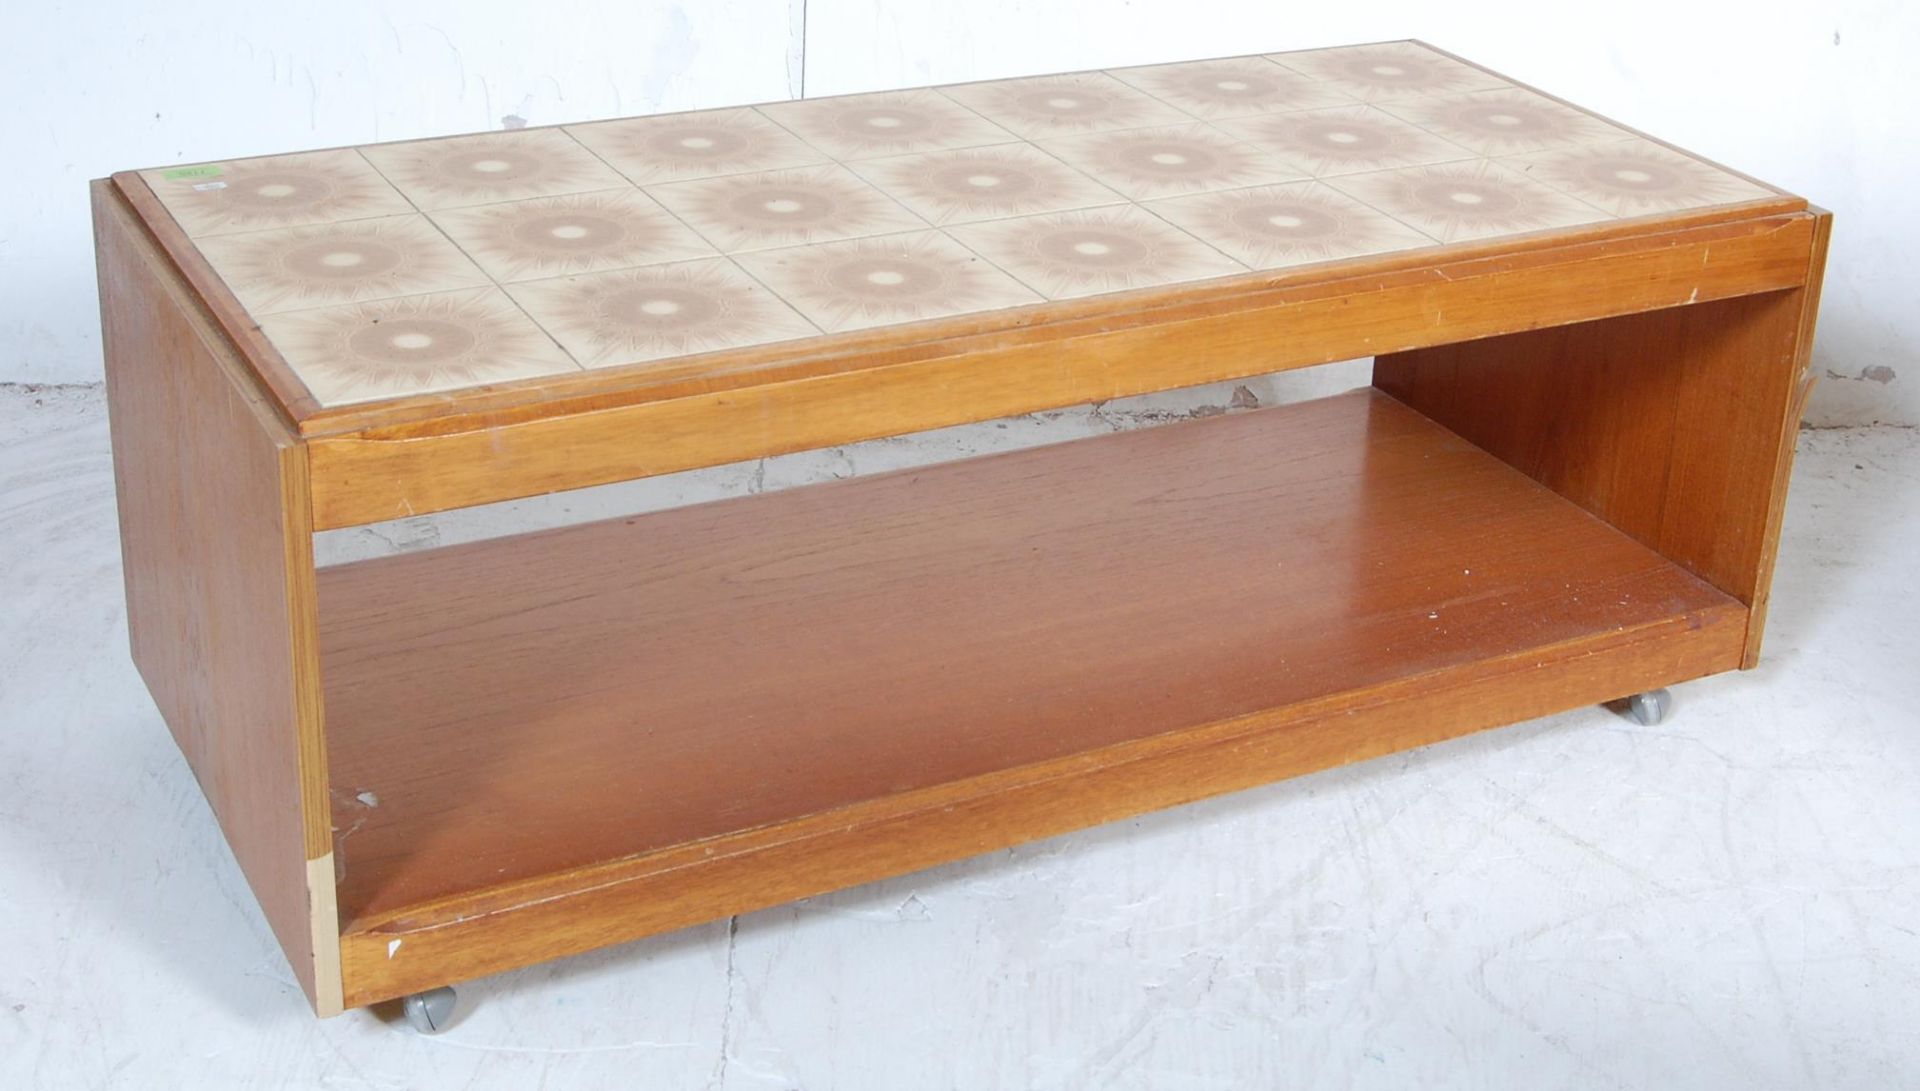 VINTAGE RETRO TILE TOP COFFEE TABLE - Image 2 of 6